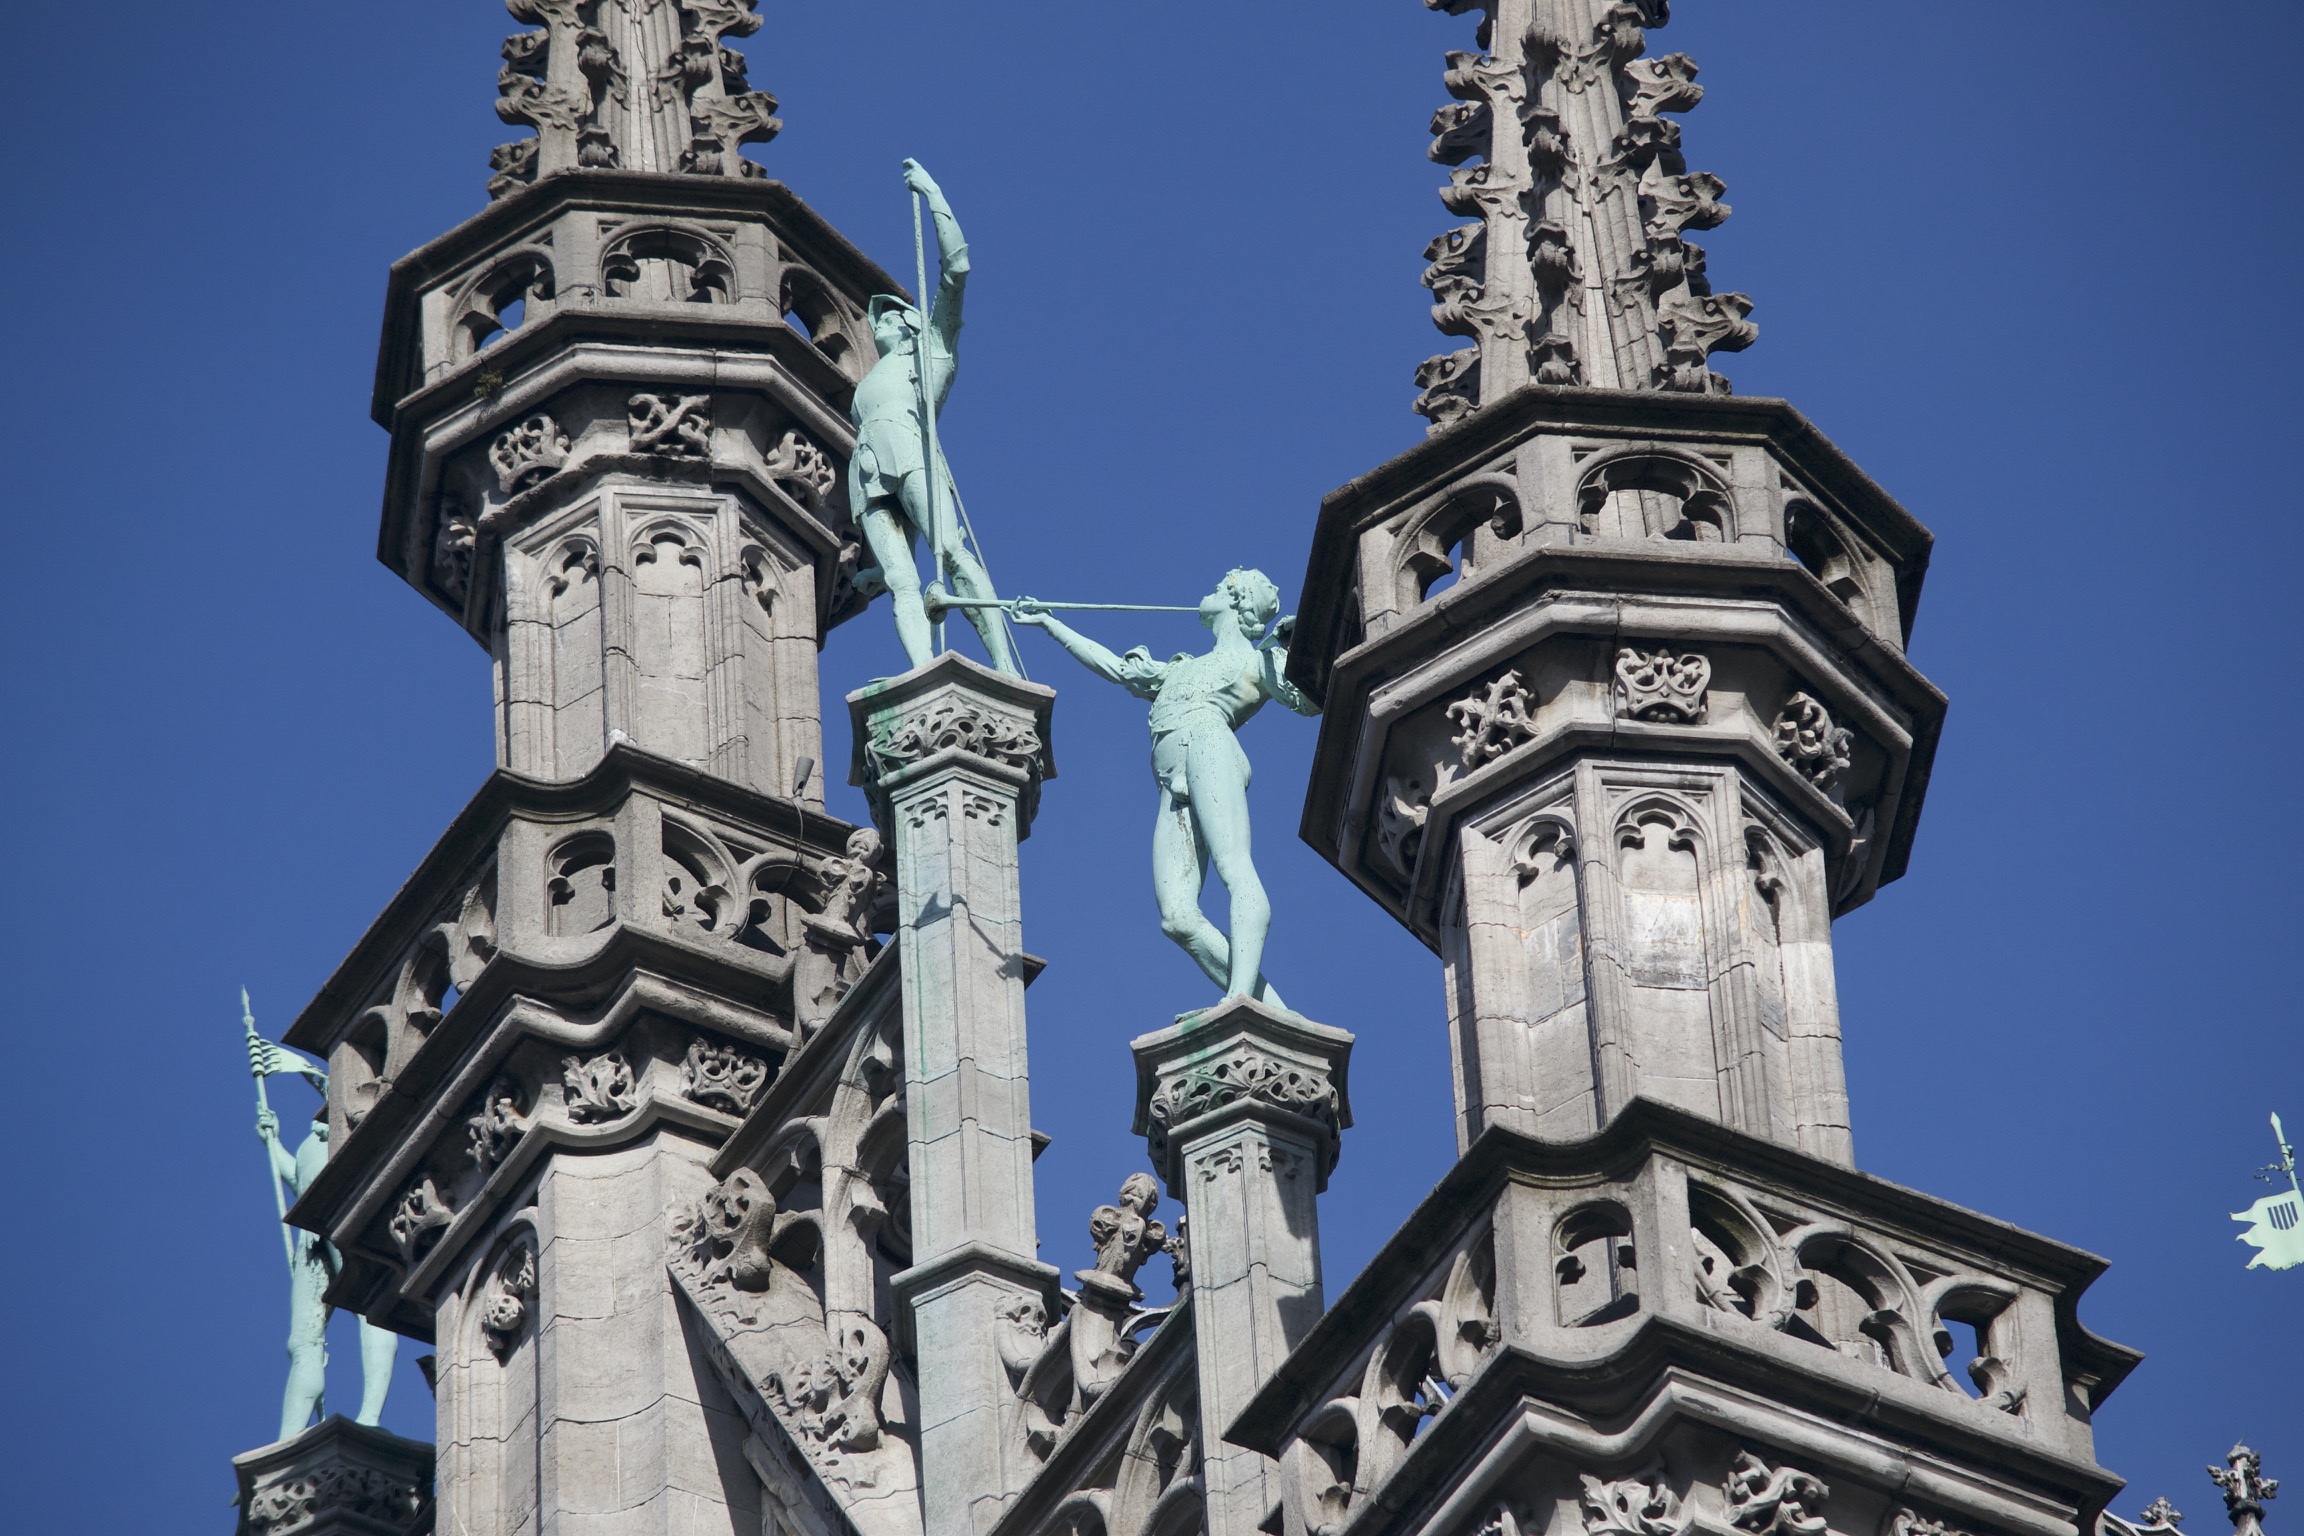 Two copper-green statues stand atop ornate pedestals amidst two spires.  One holds a pike, the other blows a herald's trumpet.